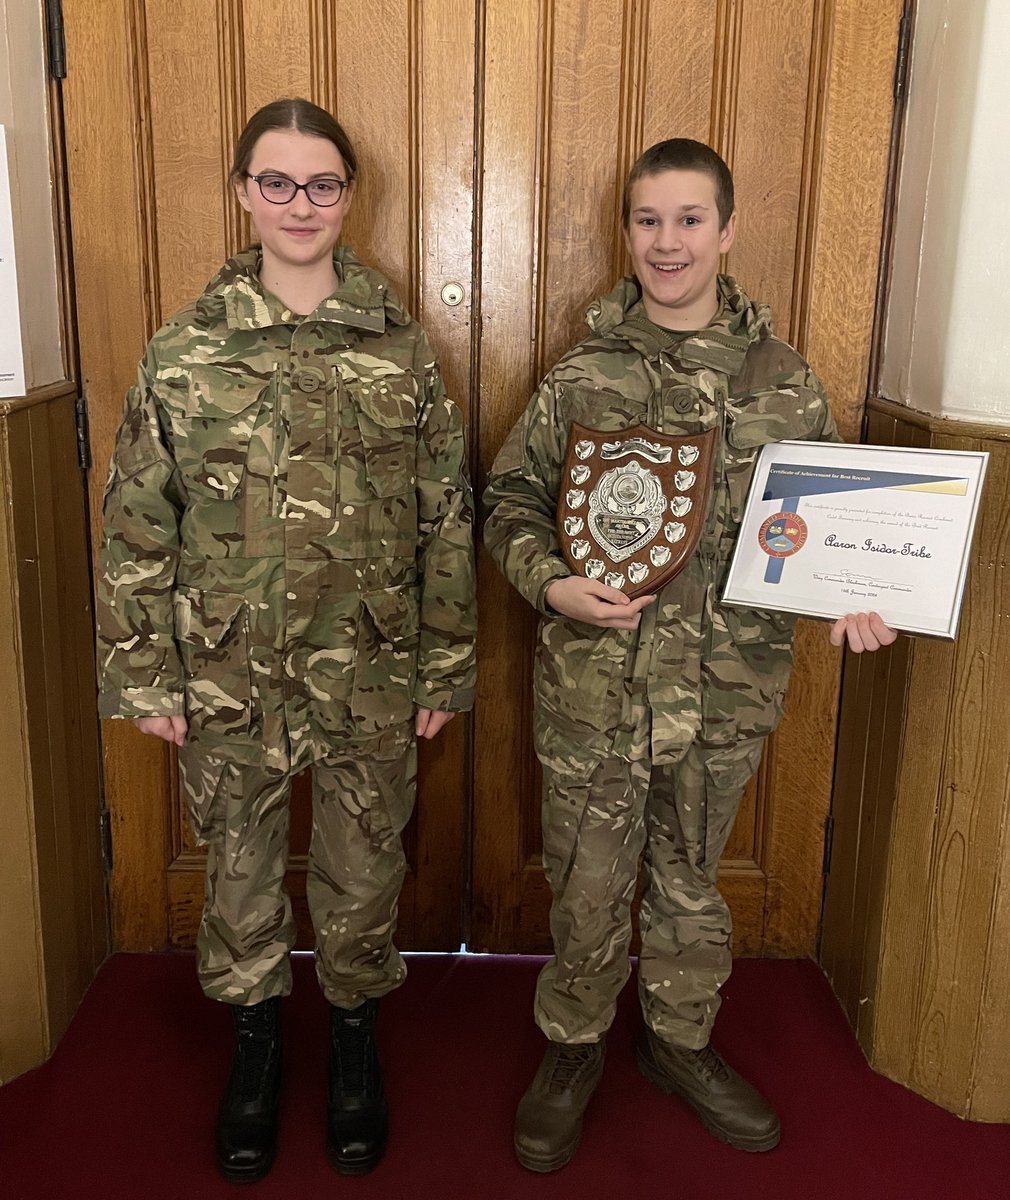 Congratulations too go to Viktoria Muller for the ‘Most Improved Recruit’ award and to Aaron Isidar-Tribe for ‘Best Recruit’. #aspirational #ourworldofopportunity #anexcitingplacetolearnandgrow